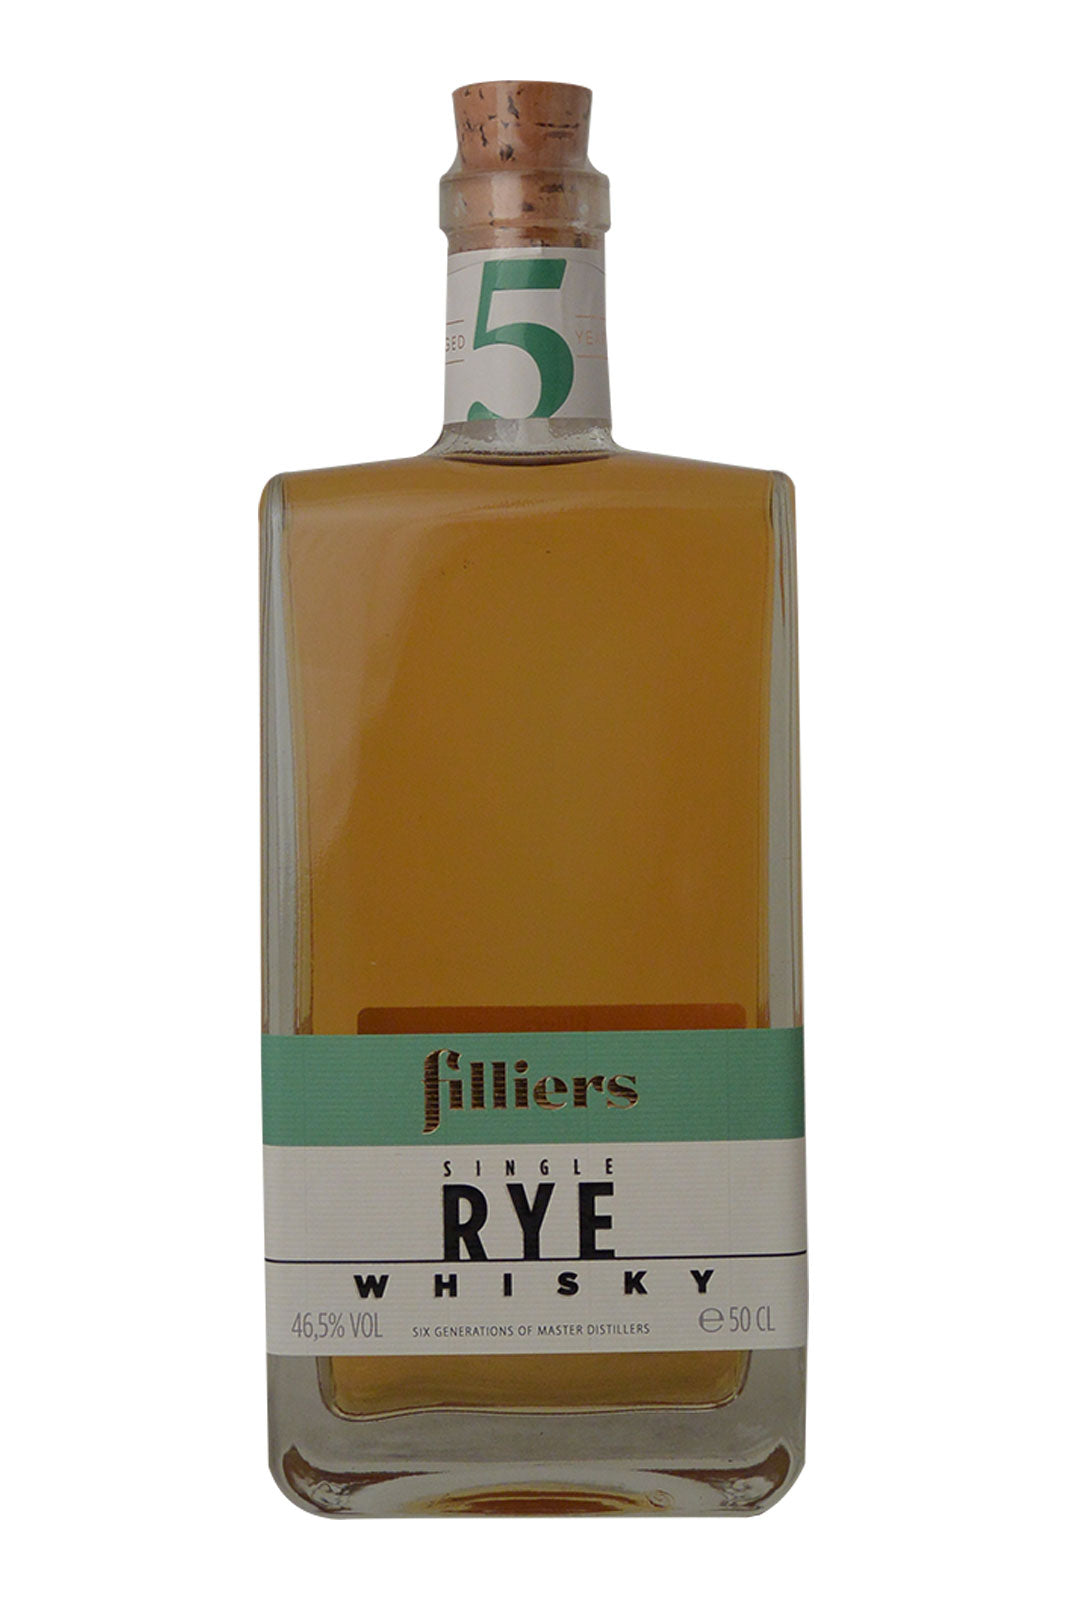 Filliers 100% Rye Whisky - 5 Years - 46.5% ABV - Limited Edition